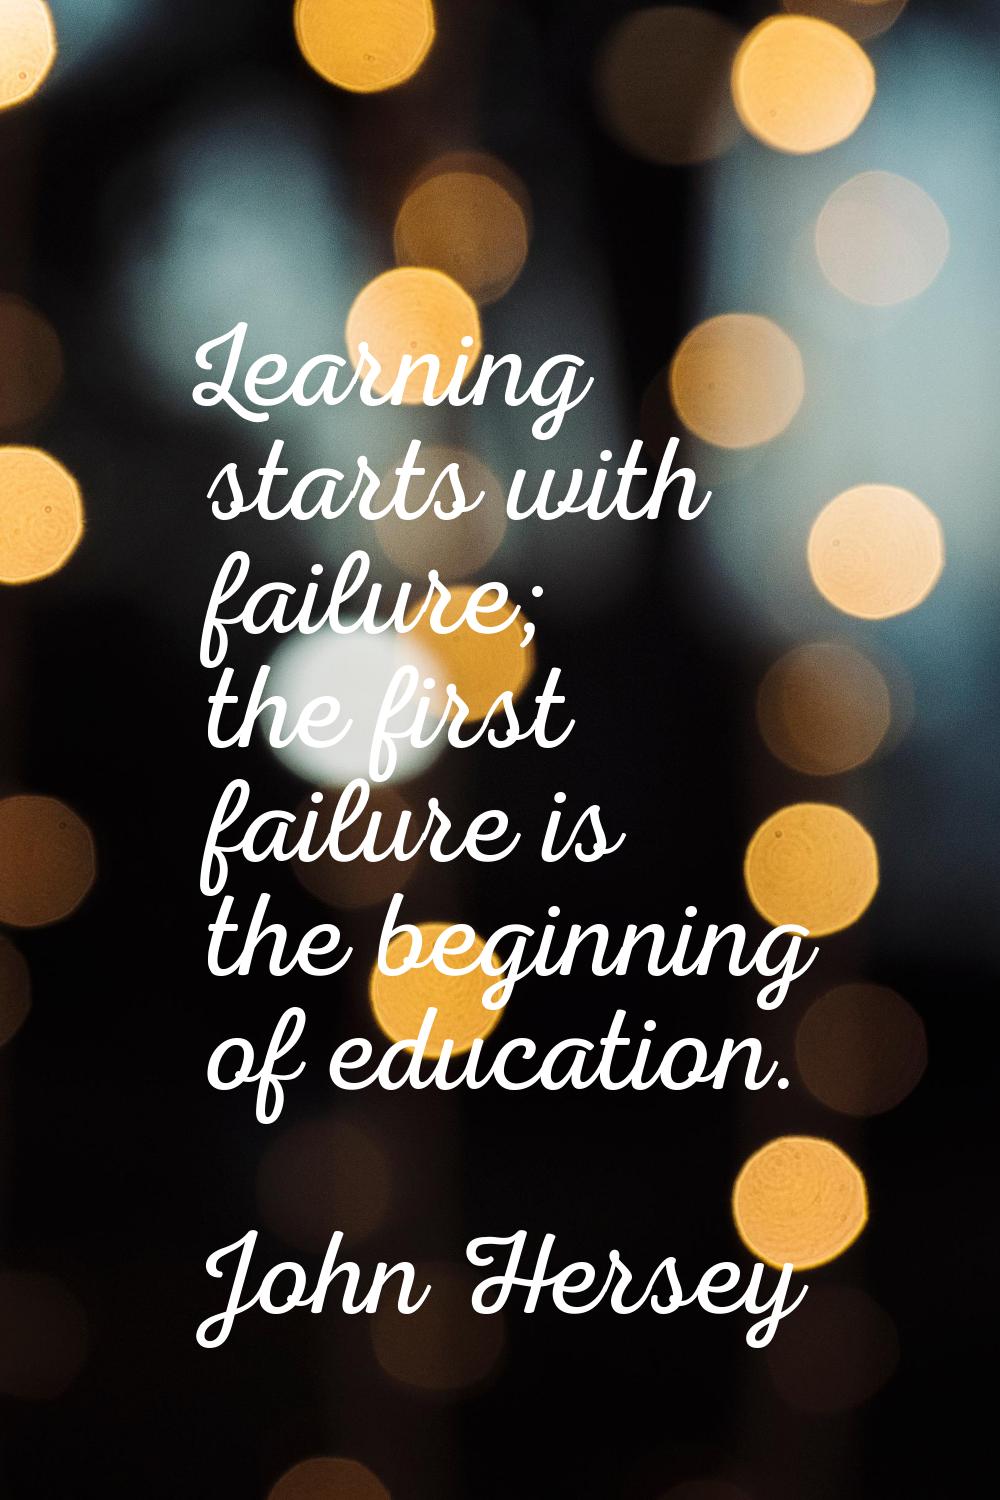 Learning starts with failure; the first failure is the beginning of education.